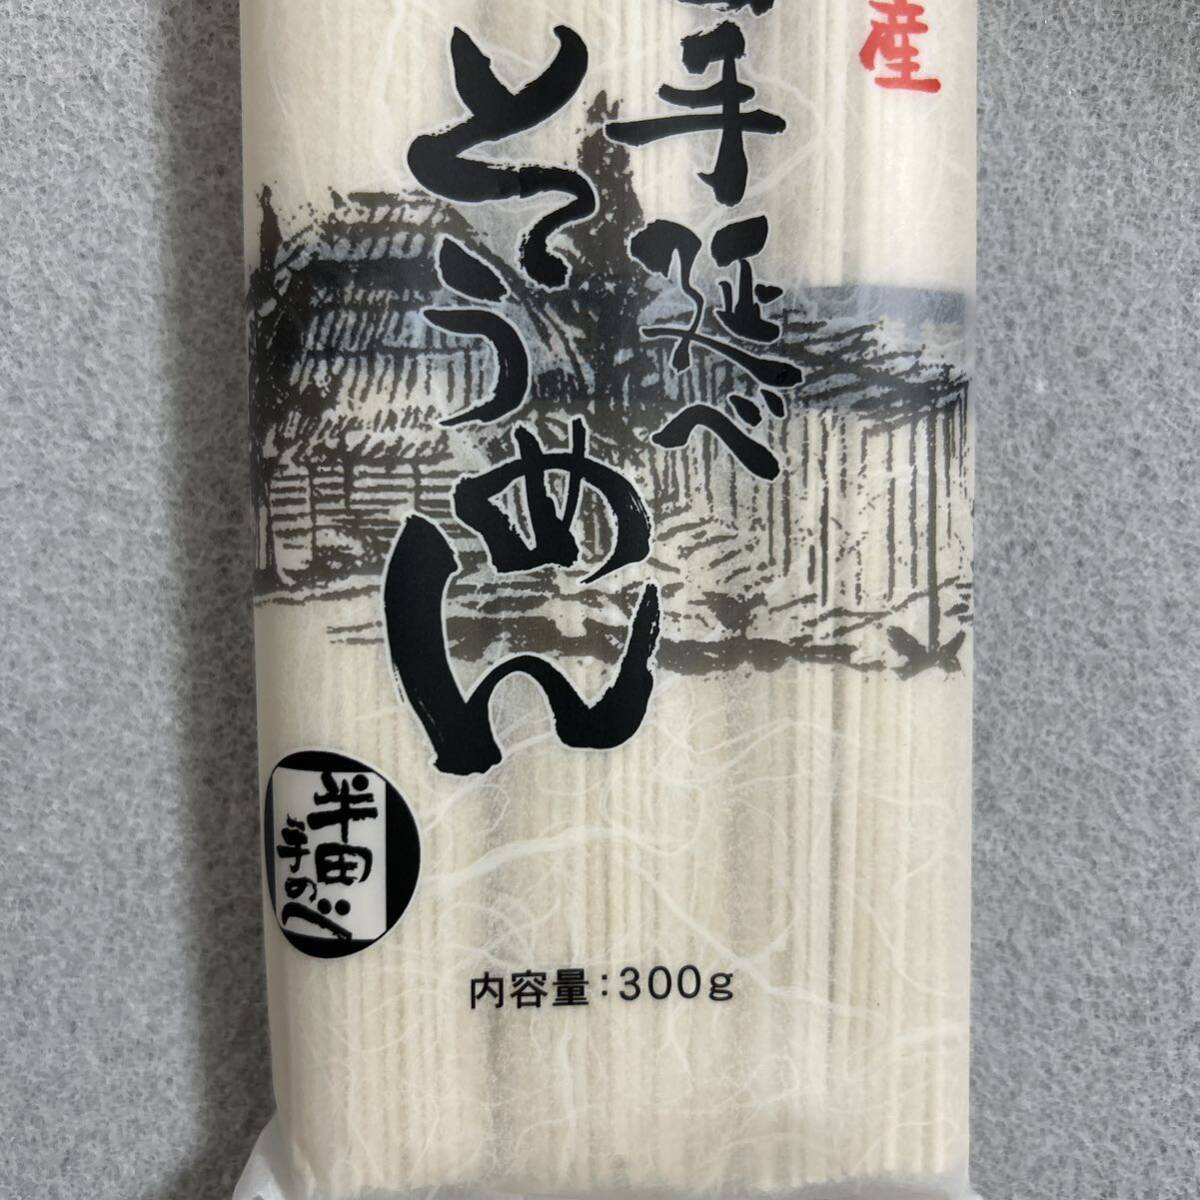  Tokushima name production half rice field hand .. vermicelli 300g×3 sack set half rice field element noodle 